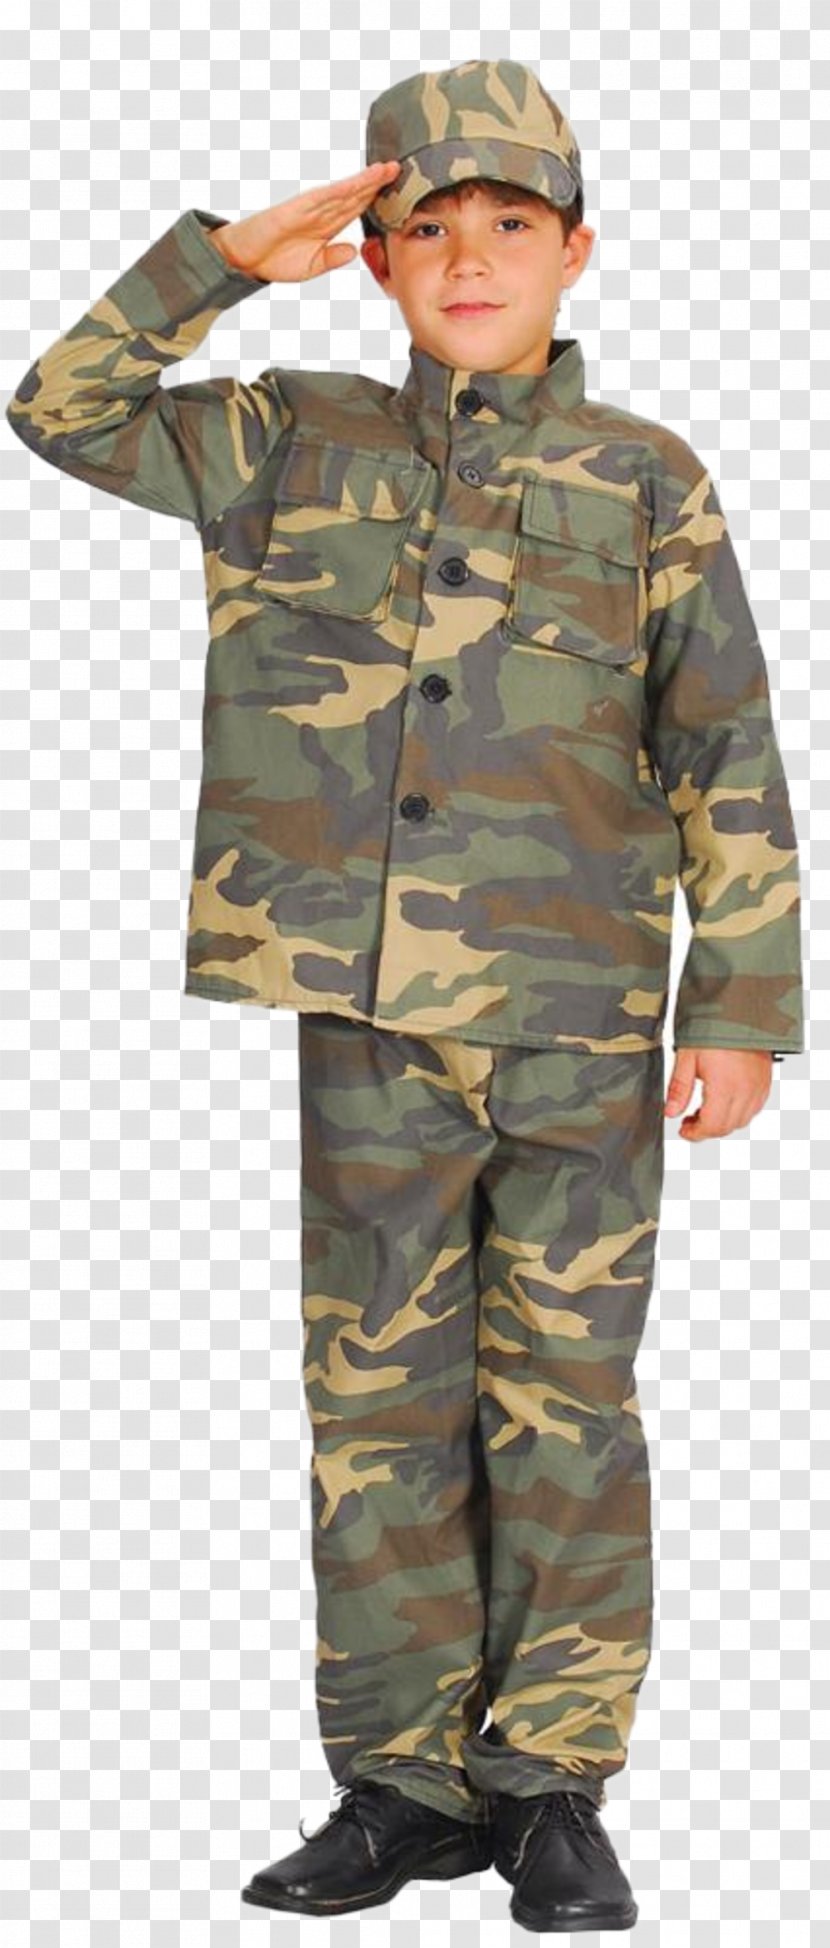 Commando Costume Party Military Boy - Clothing - Rambo Transparent PNG